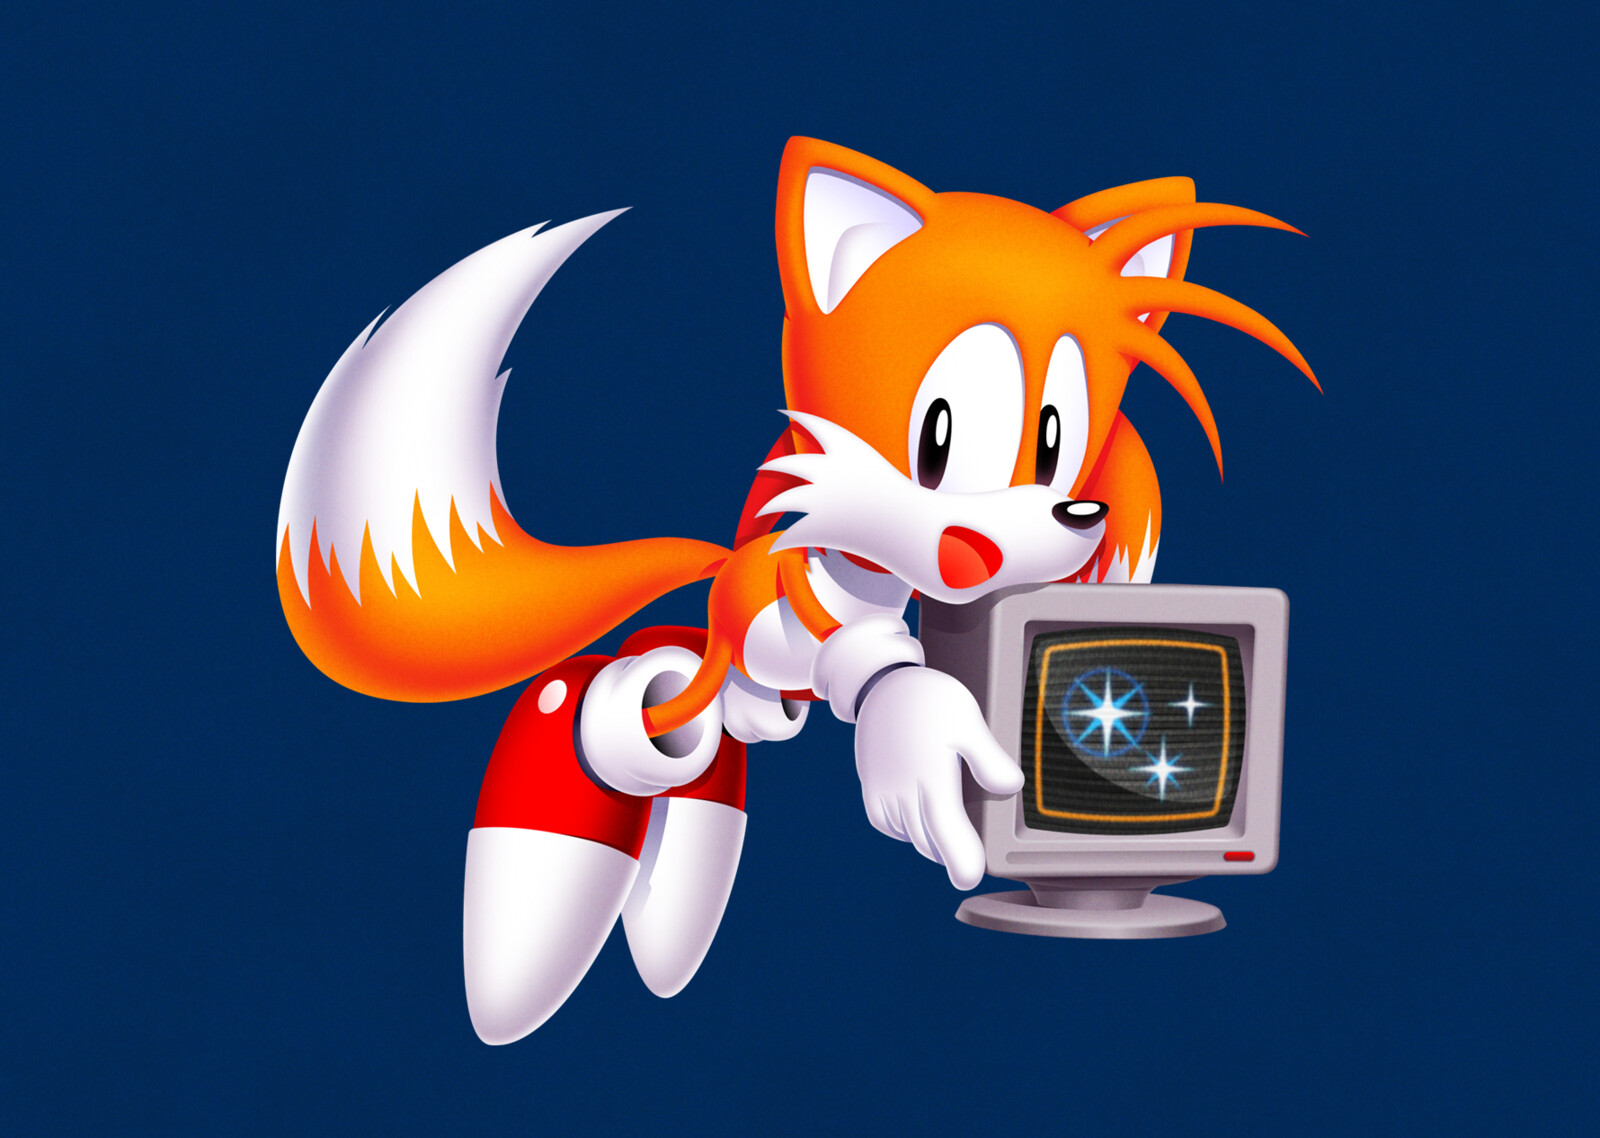 Tails (Screensaver Style)